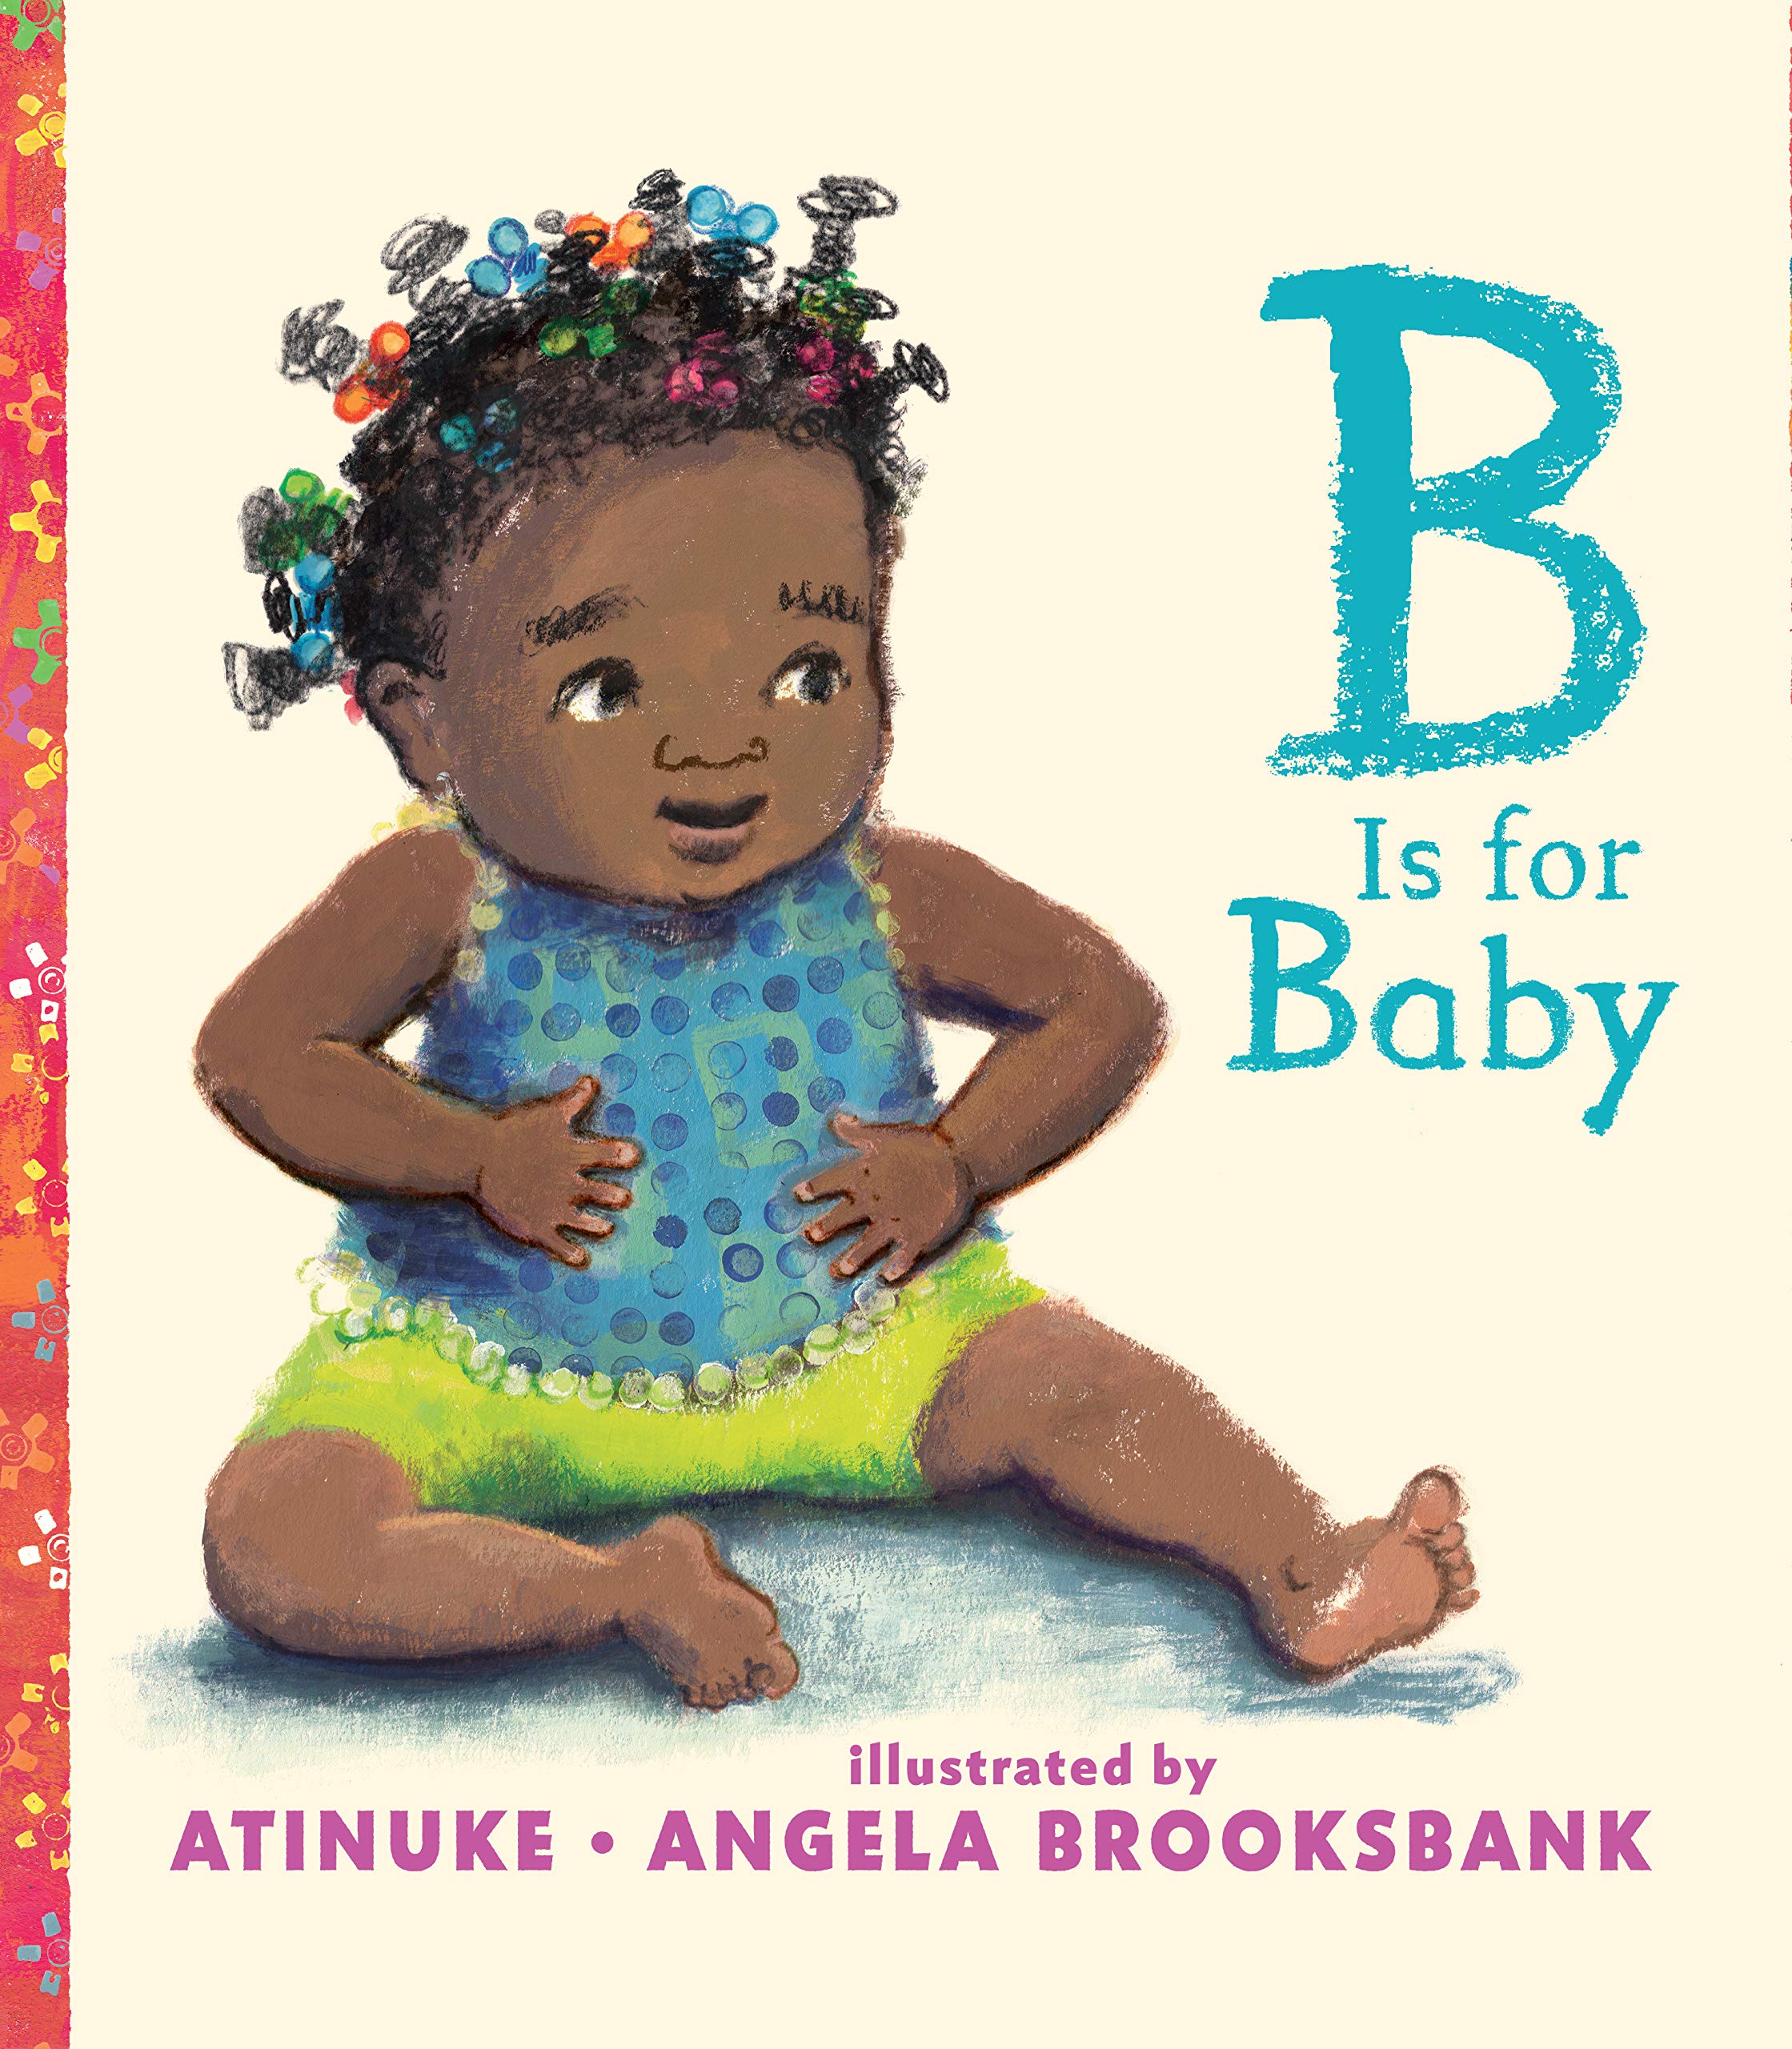 B is for Baby book cover